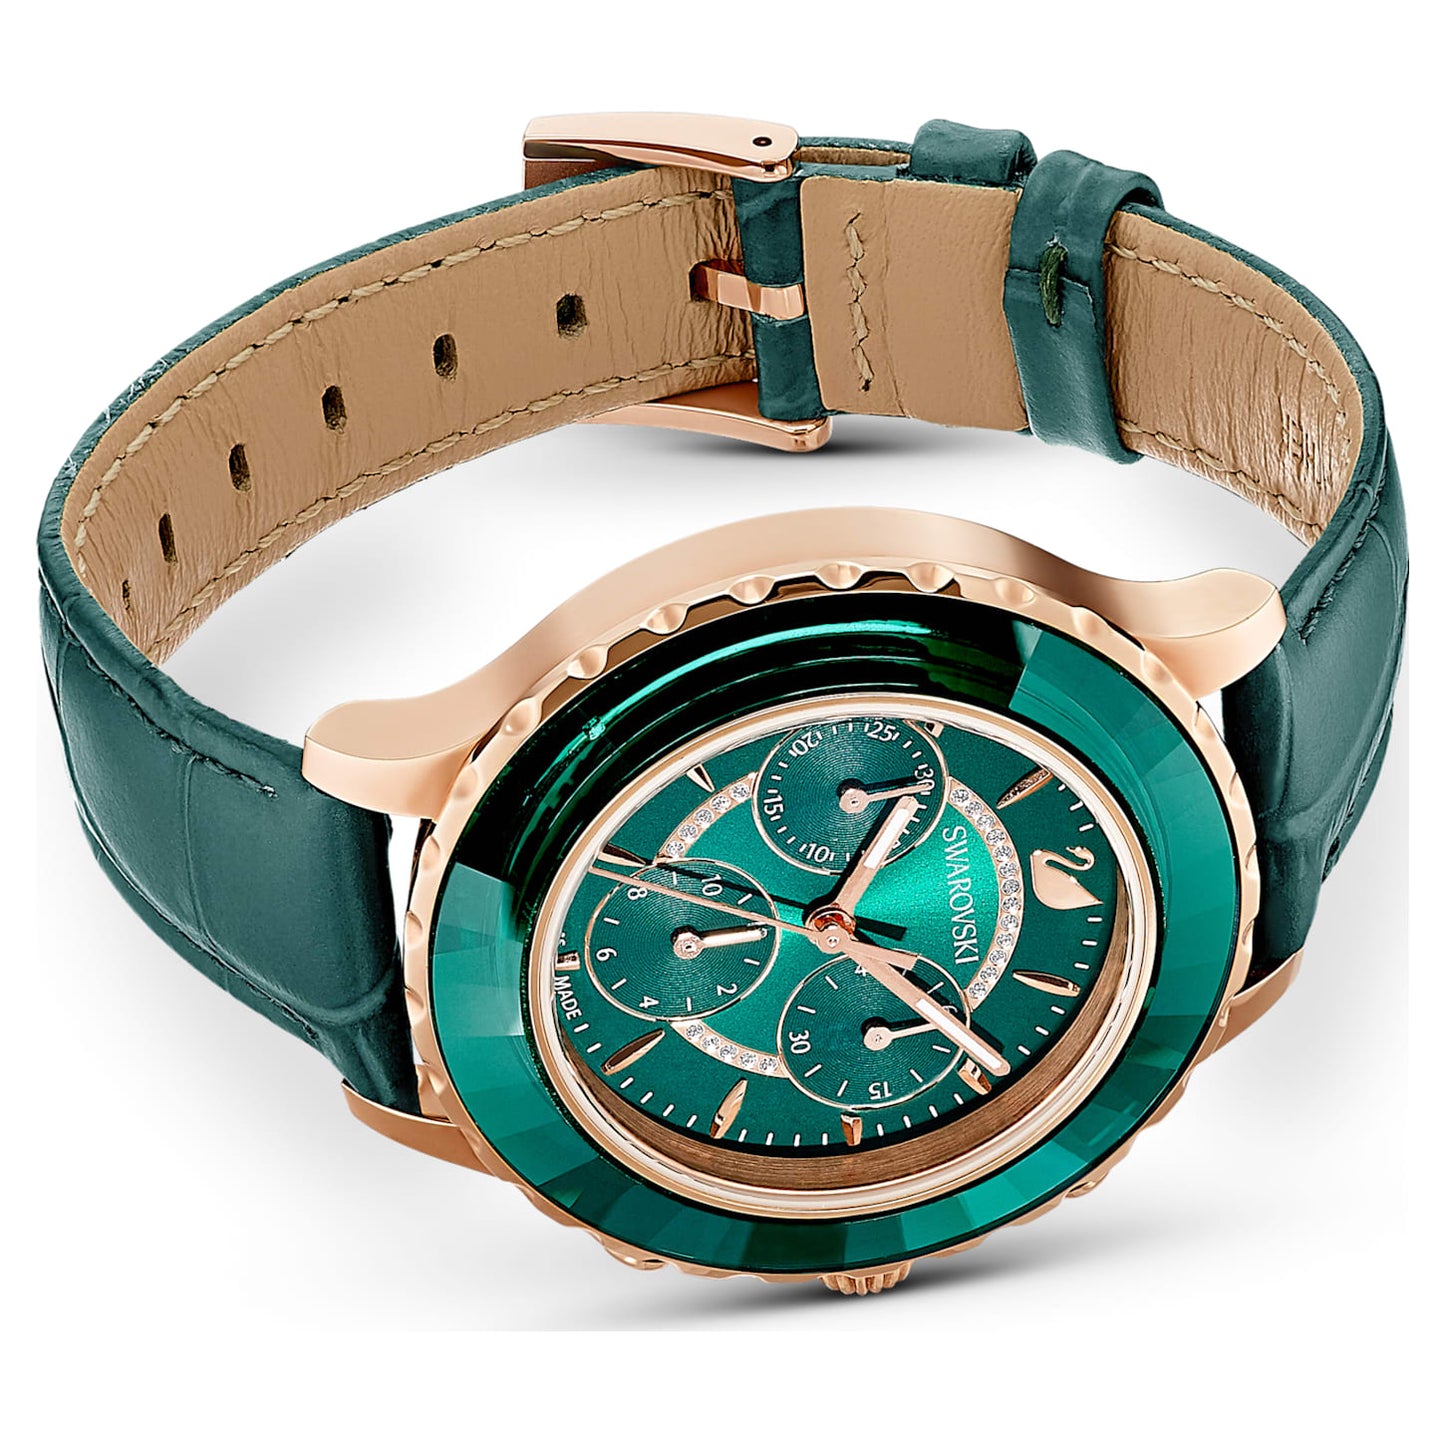 Octea Lux Chrono watch Swiss Made, Leather strap, Green, Rose gold-tone finish